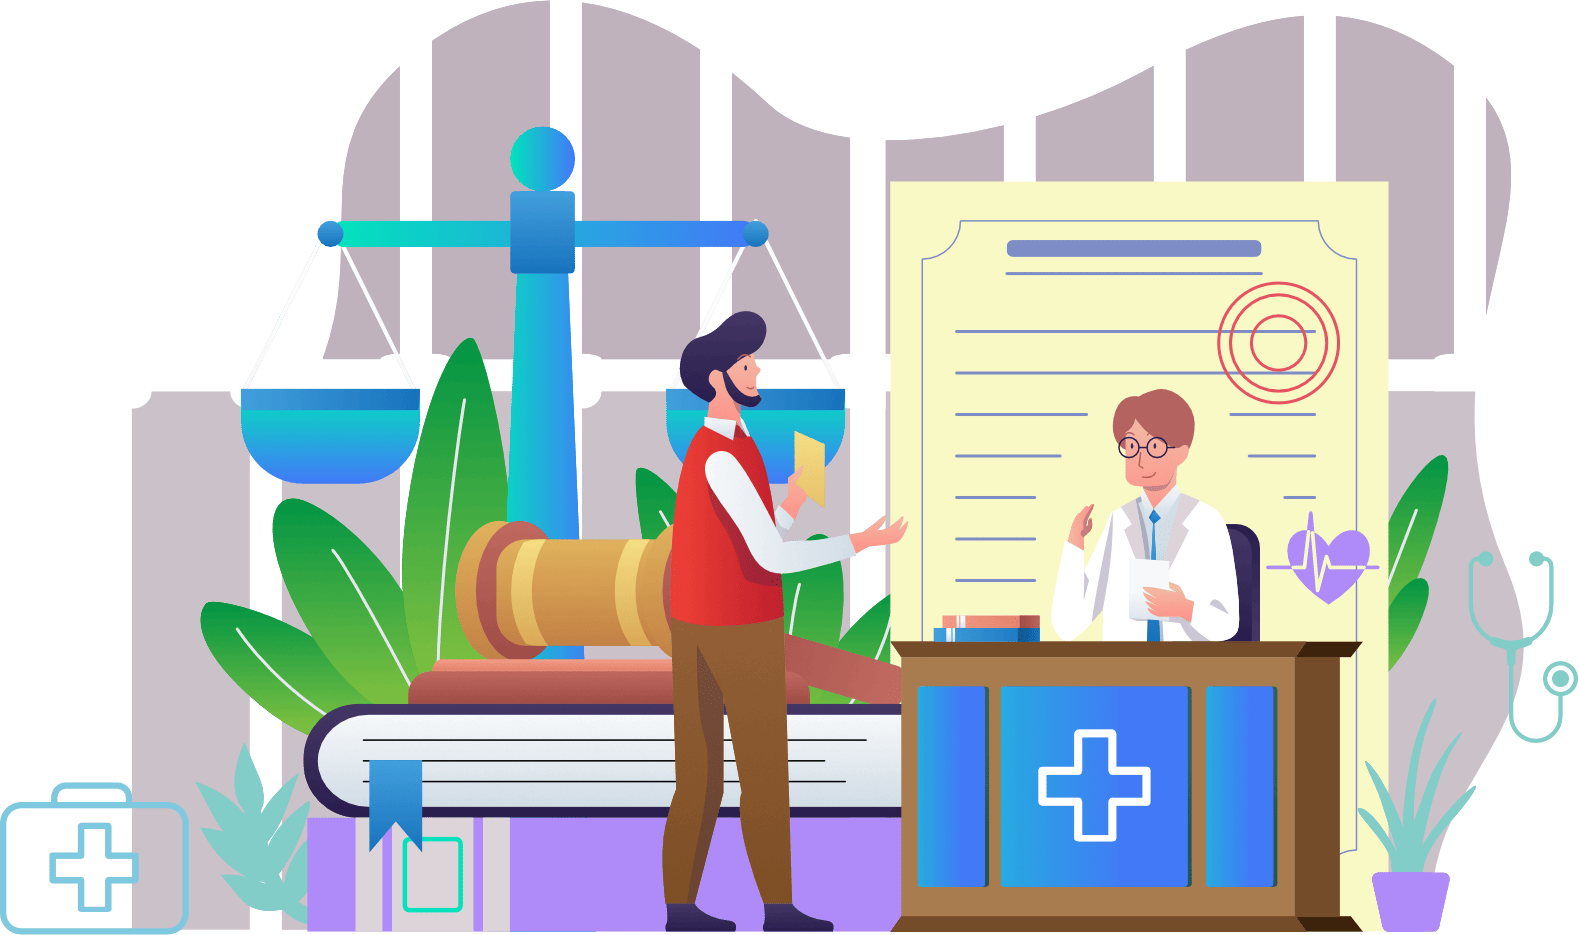 Abstract illustration concept of healthcare compliance with legal symbols such as a contract, gavel, and a physician, etc